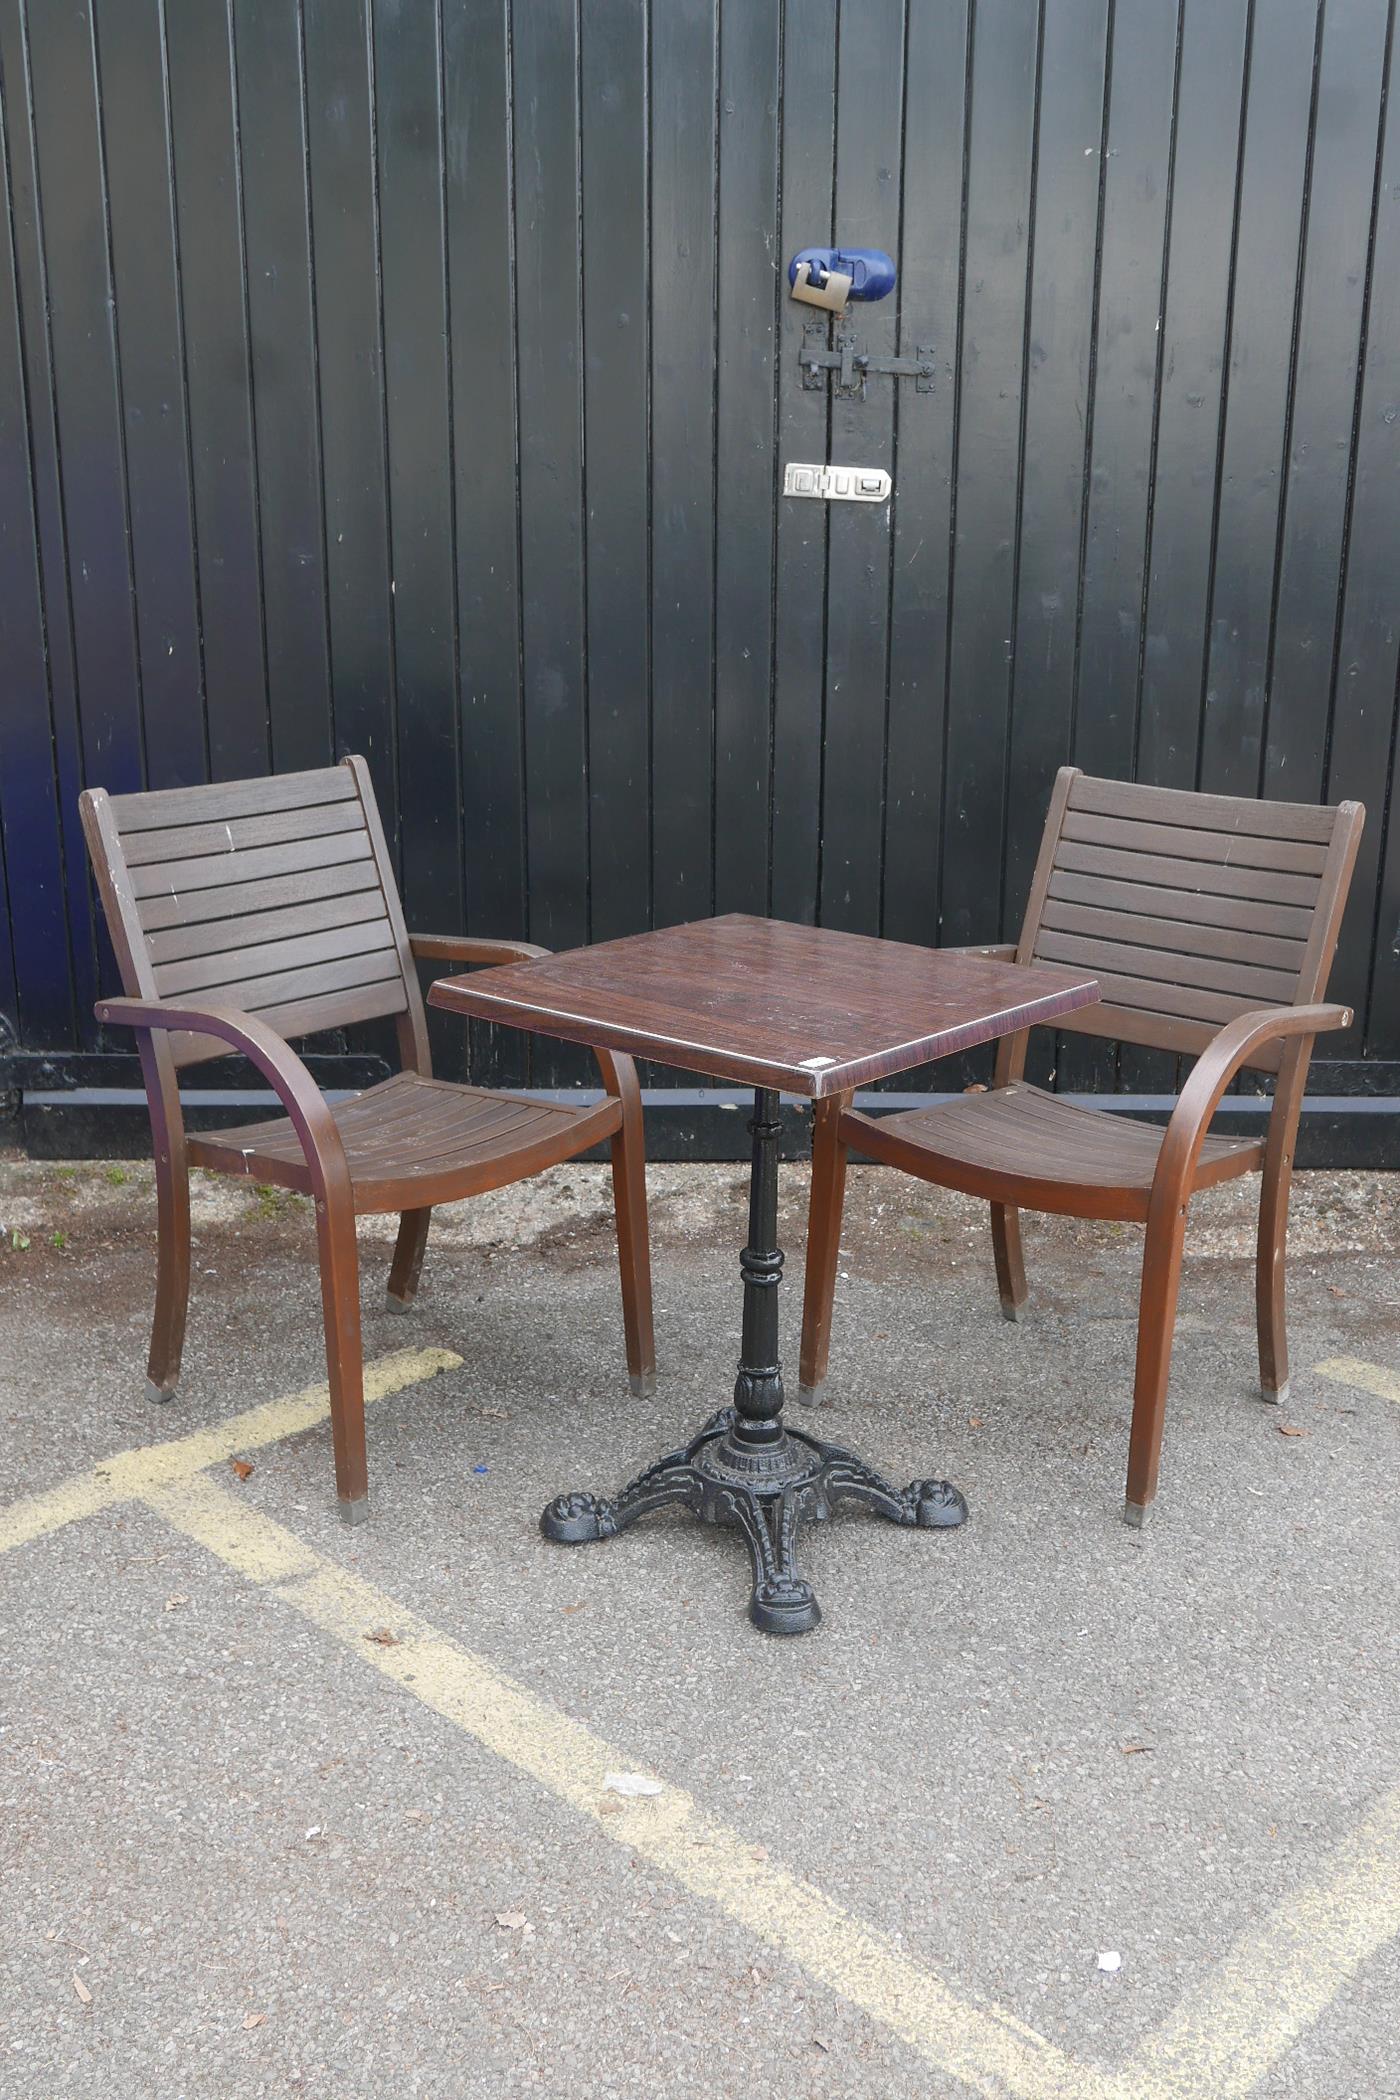 Two teak garden elbow chairs and a wrought iron and plastic bistro table, 23" x 23", 29" high